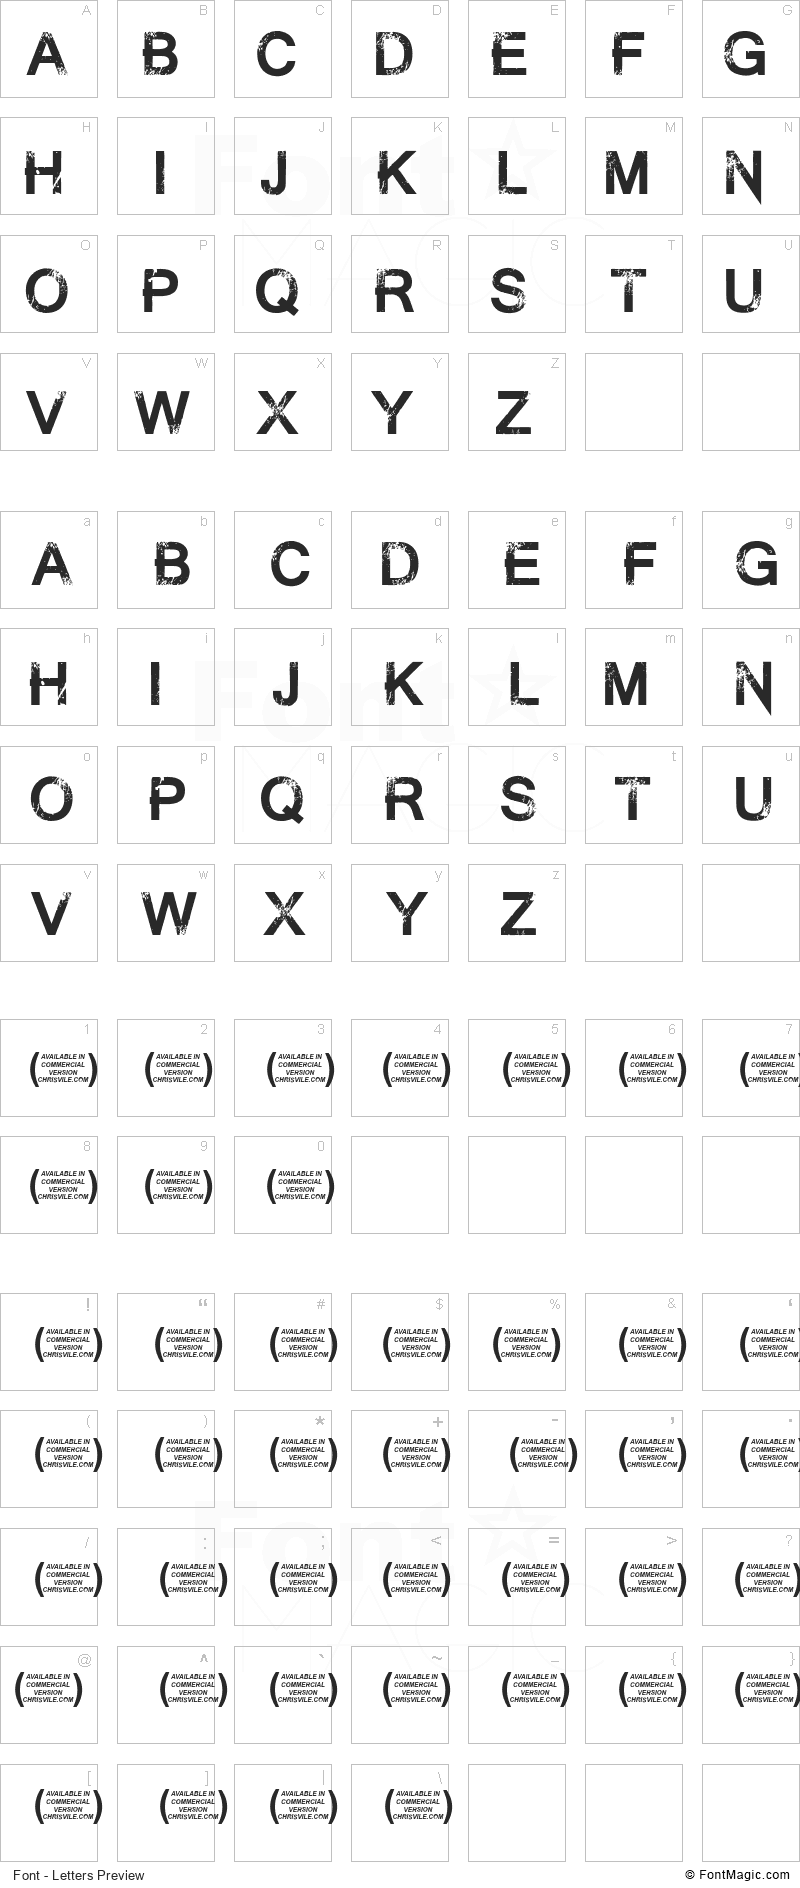 Summon the Executioner Font - All Latters Preview Chart